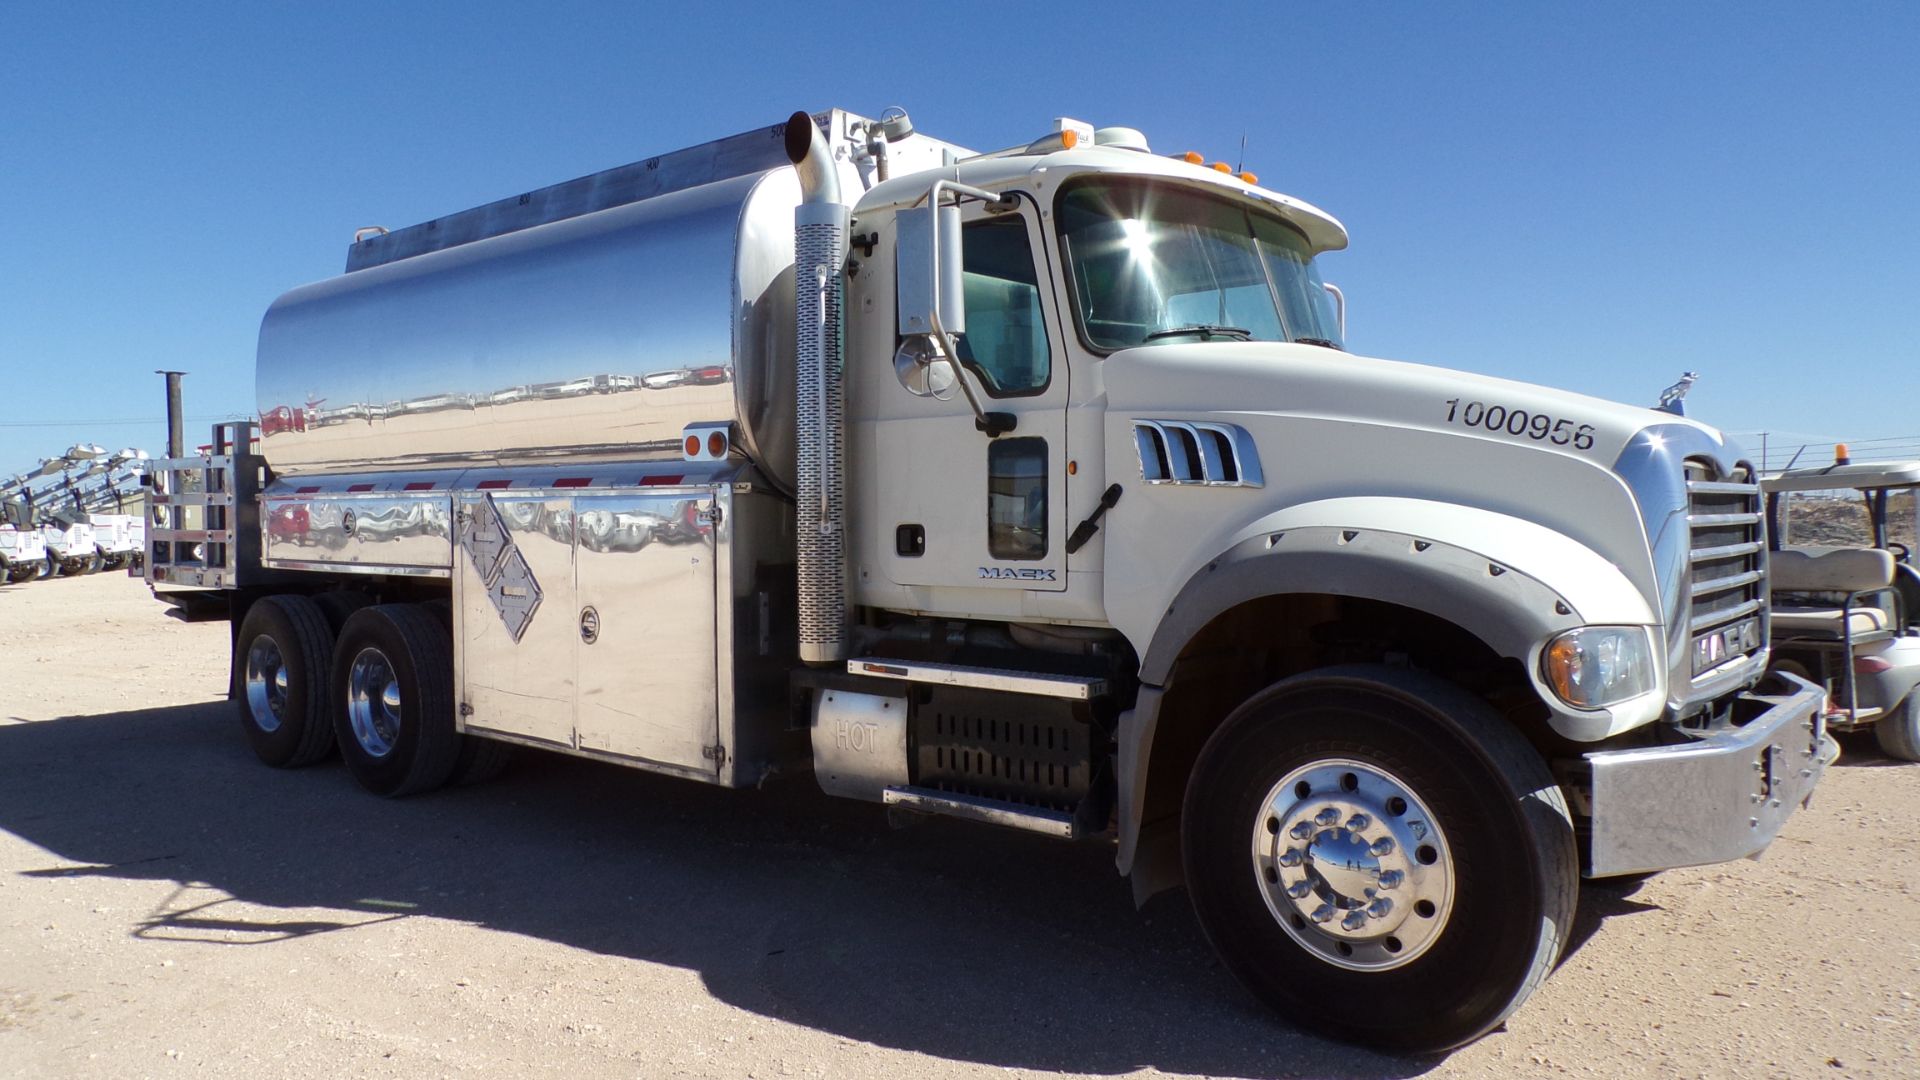 Located in YARD 1 - Midland, TX (X) (0956) 2013 MACK GU713 T/A DAY CAB OIL DELIVERY TRUCK, VIN- - Image 7 of 7